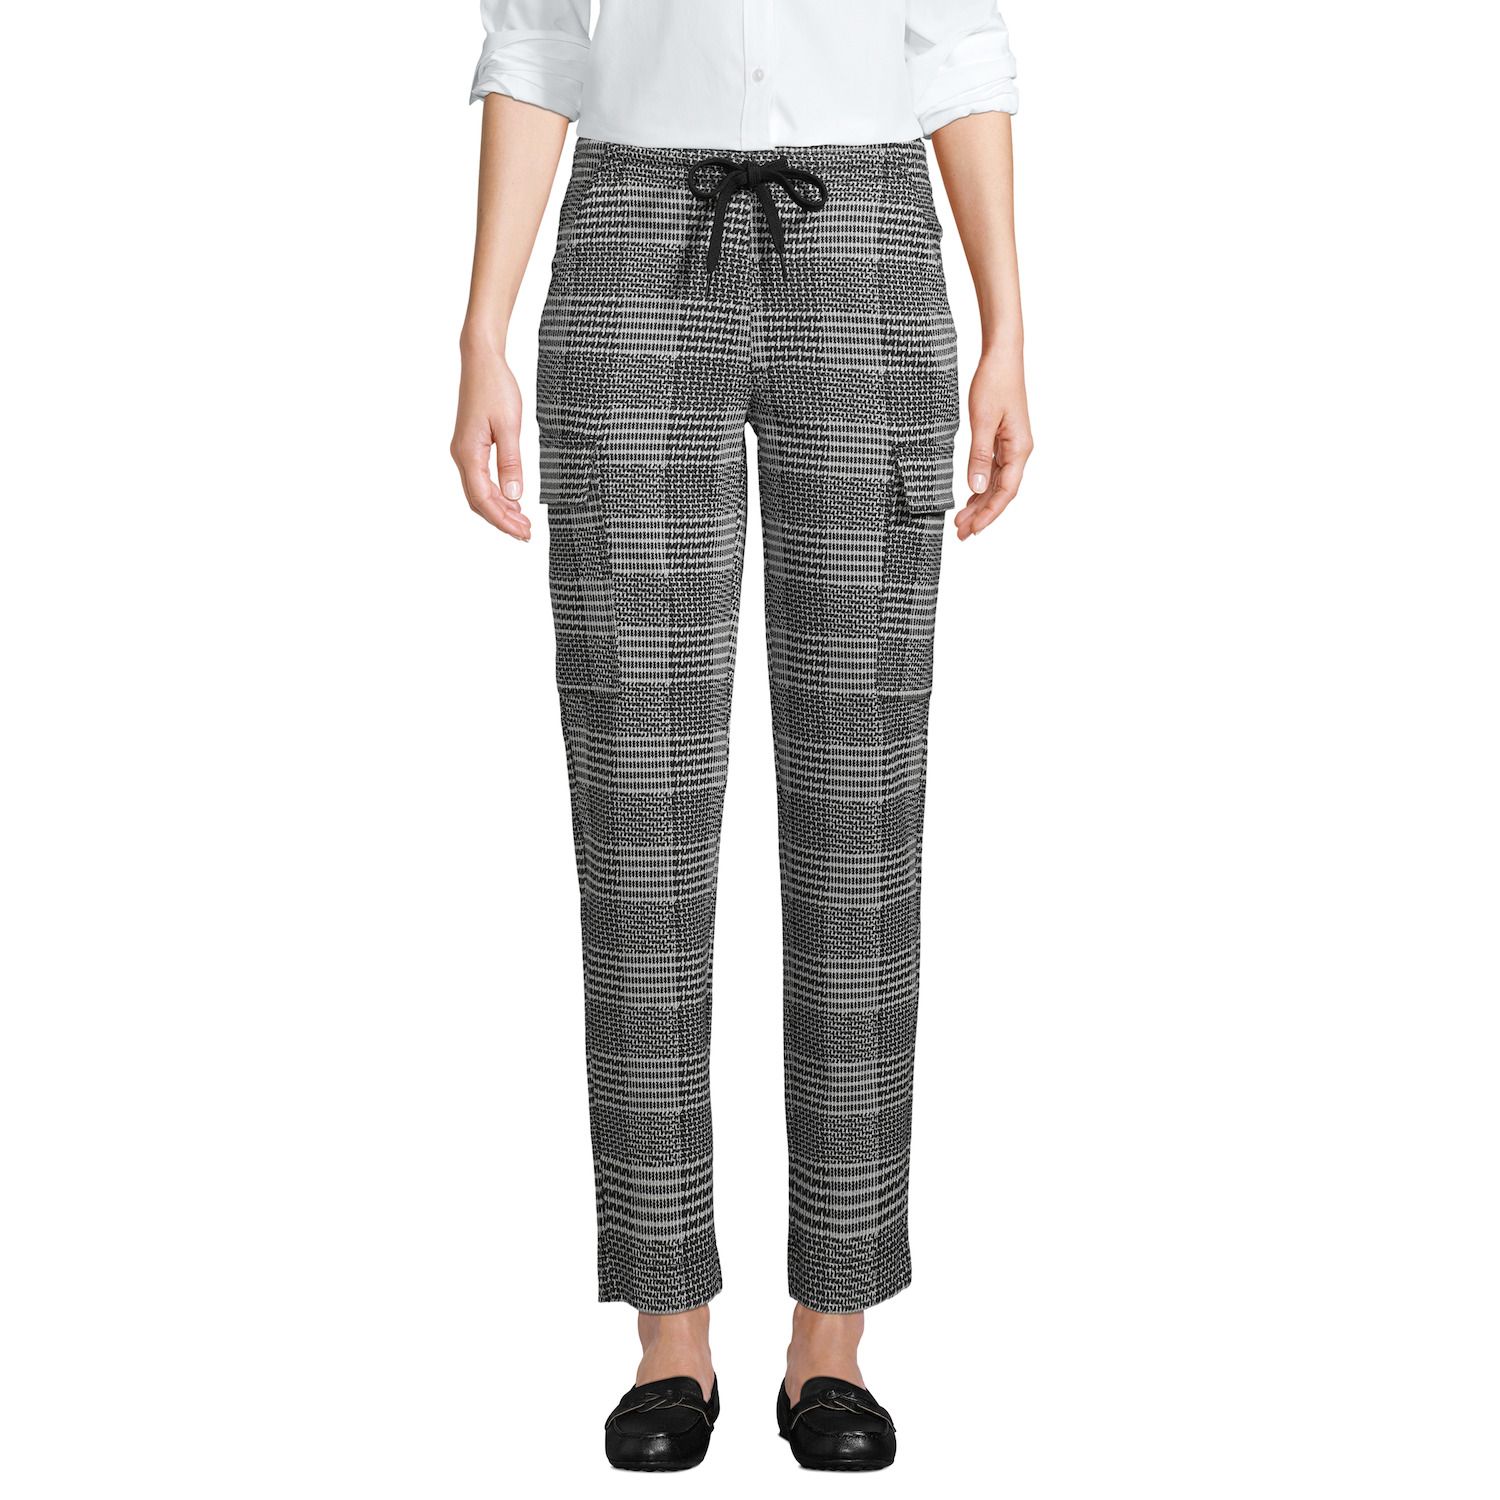 Image for Lands' End Petite Sport Knit Jacquard High-Waisted Cargo Ankle Pants at Kohl's.